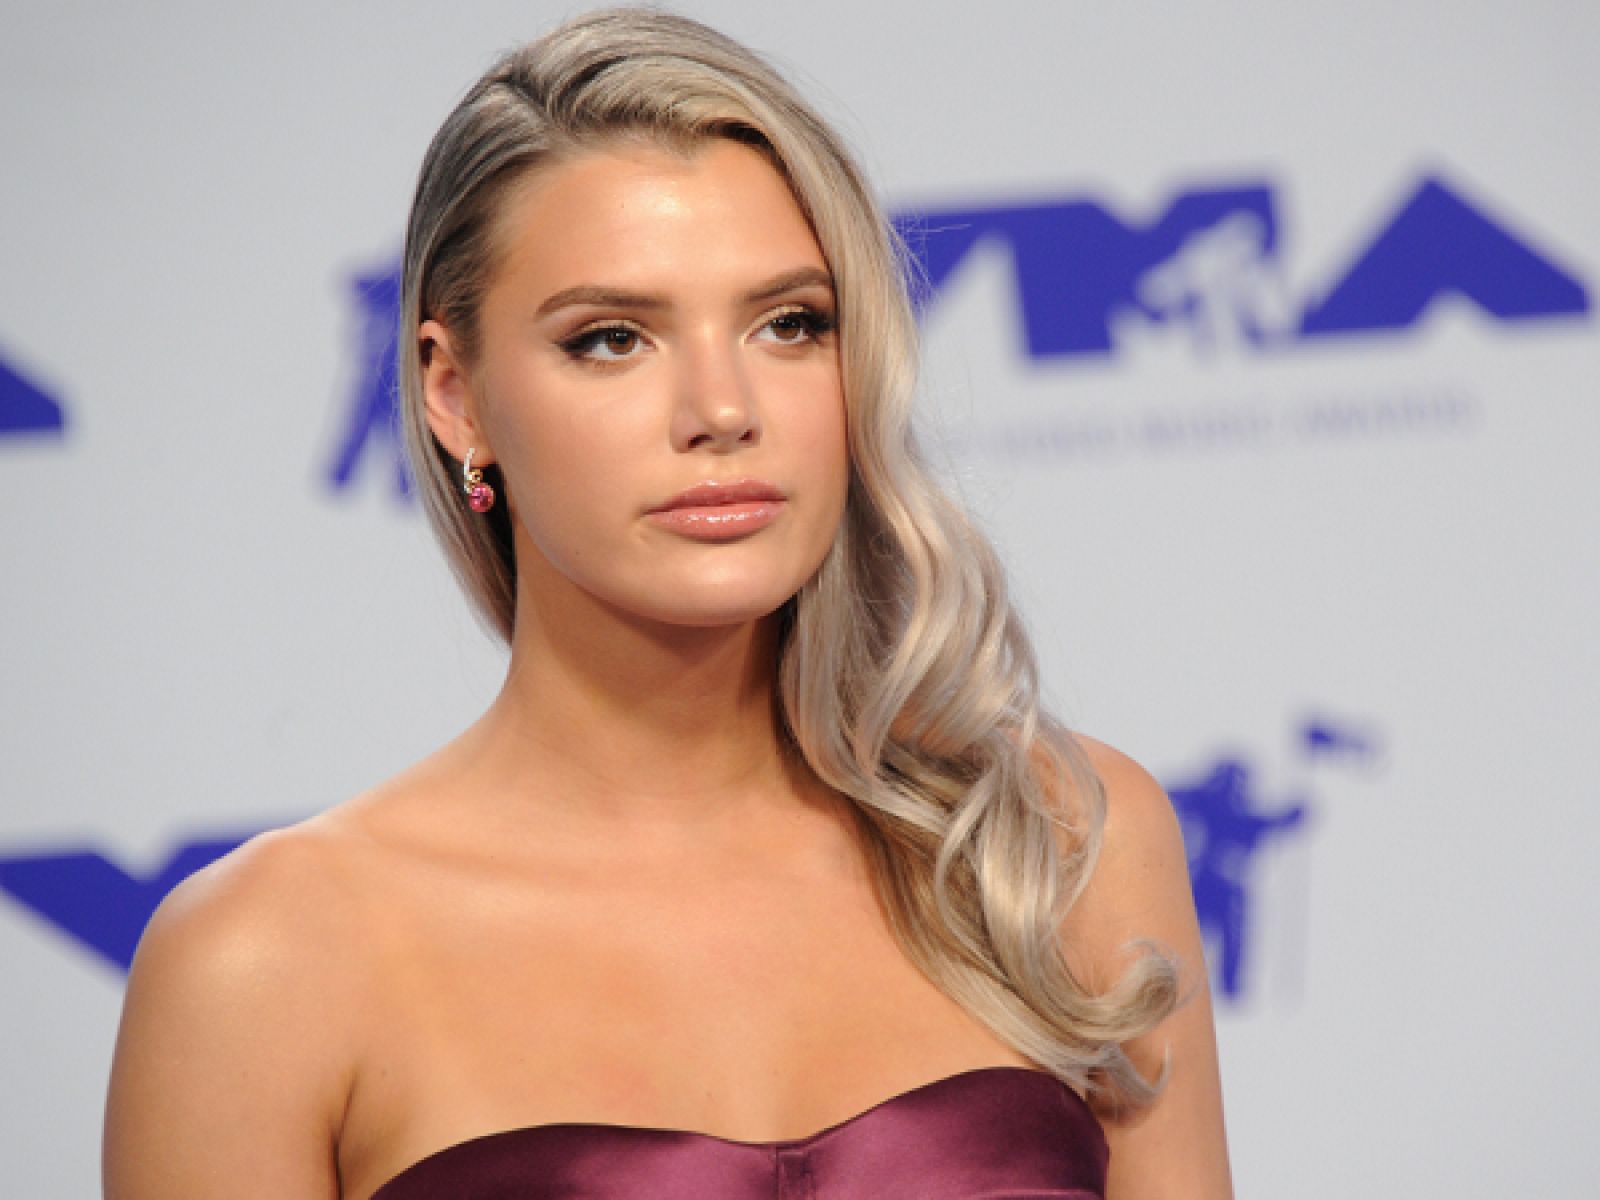 Alissa Violet 2022 Dating Net Worth Tattoos Smoking And Body 